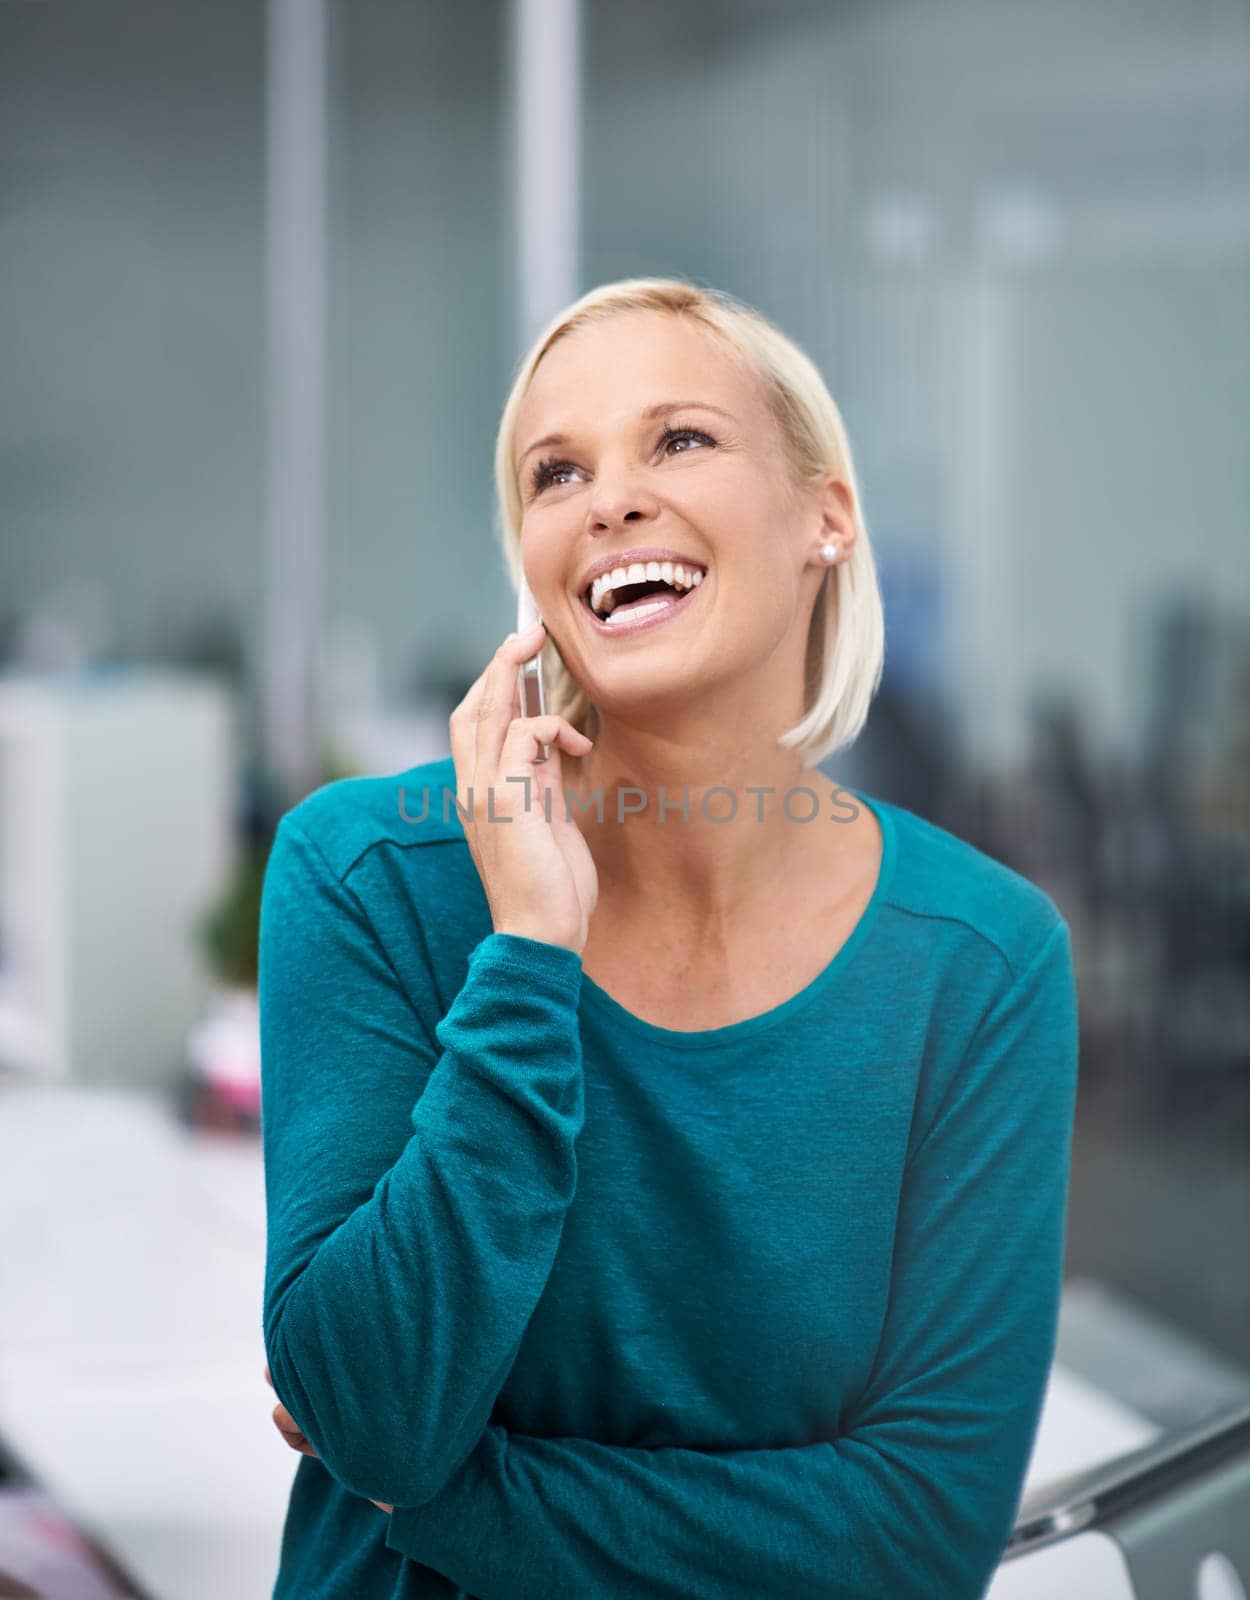 Woman, phone call and laugh with thinking in office for networking, contact or negotiation. Business person, smartphone and excited for conversation, communication and mobile connection in workplace.